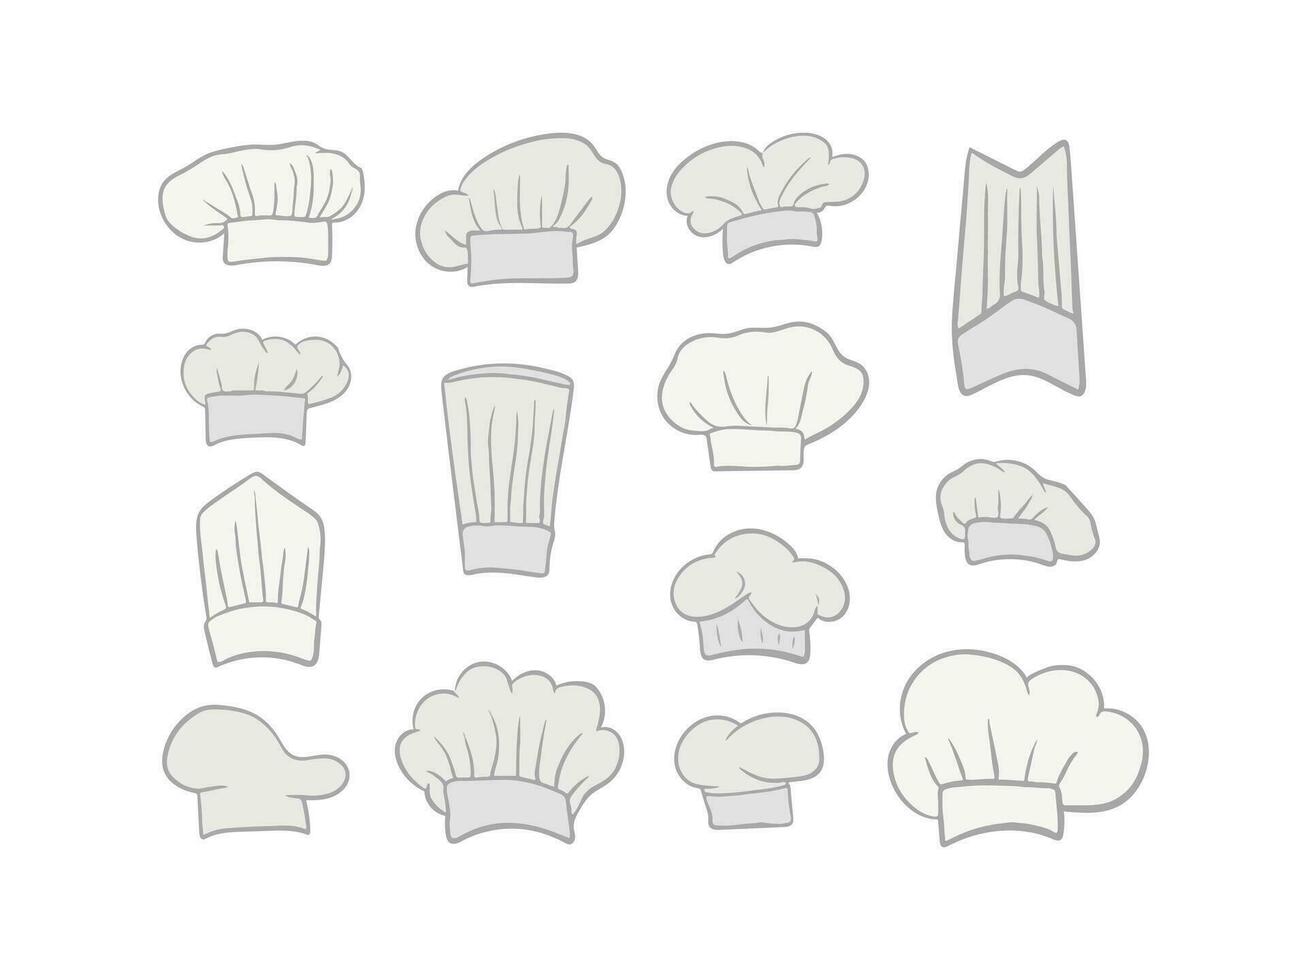 Chef hat icon set. Vector illustration isolated on white background